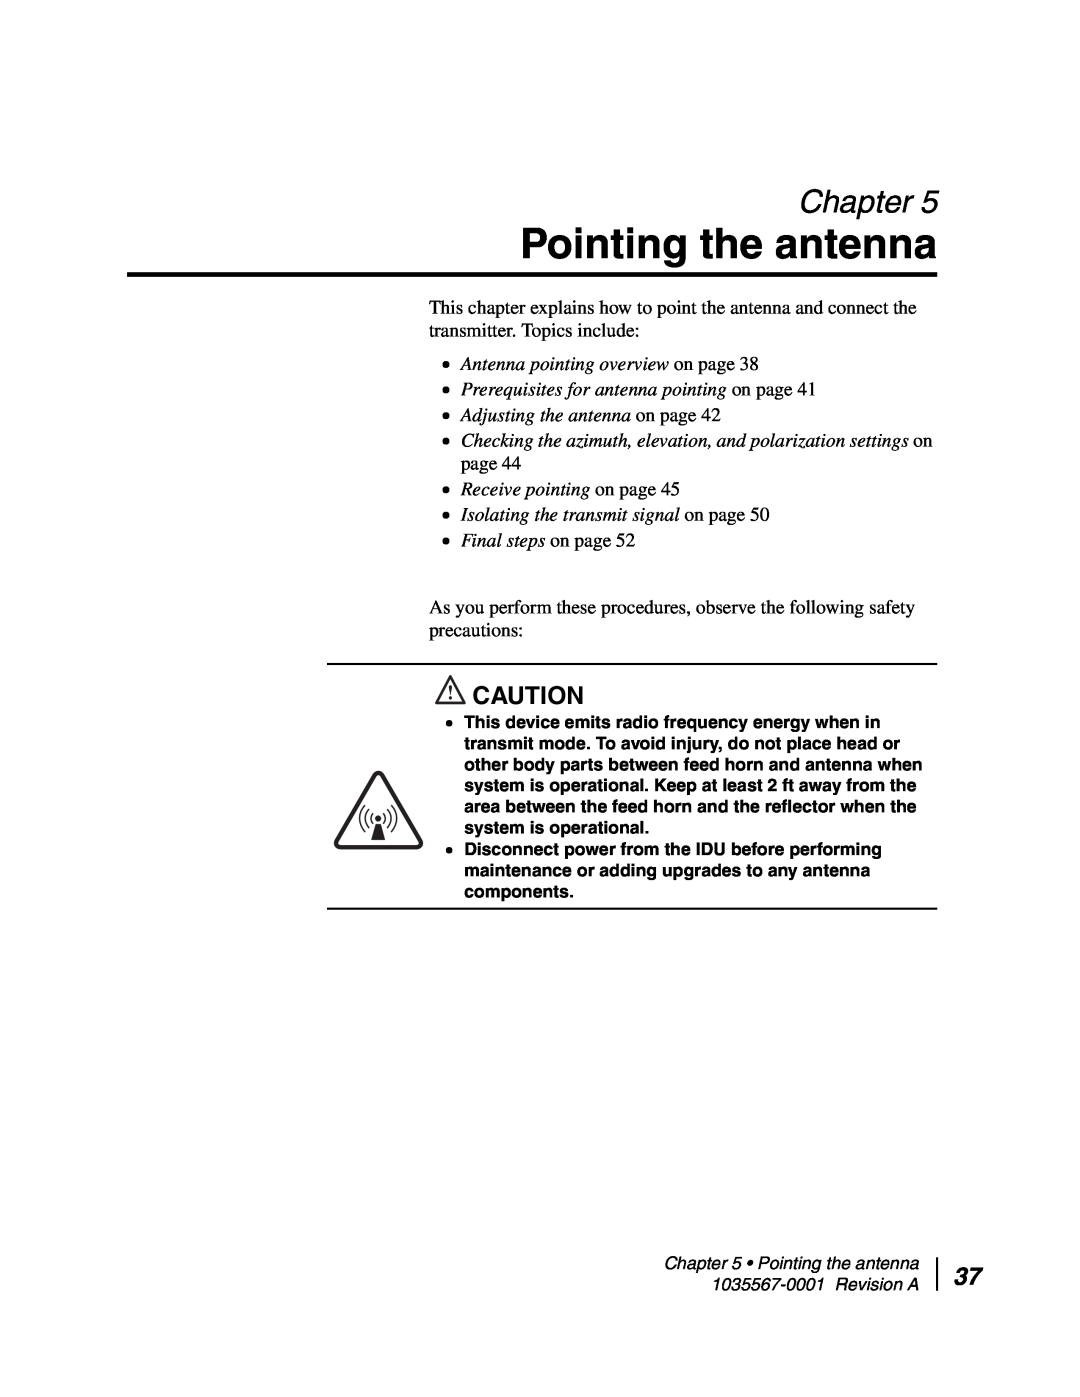 Hughes AN4-074-DF Pointing the antenna, Chapter, Antenna pointing overview on page, Adjusting the antenna on page 